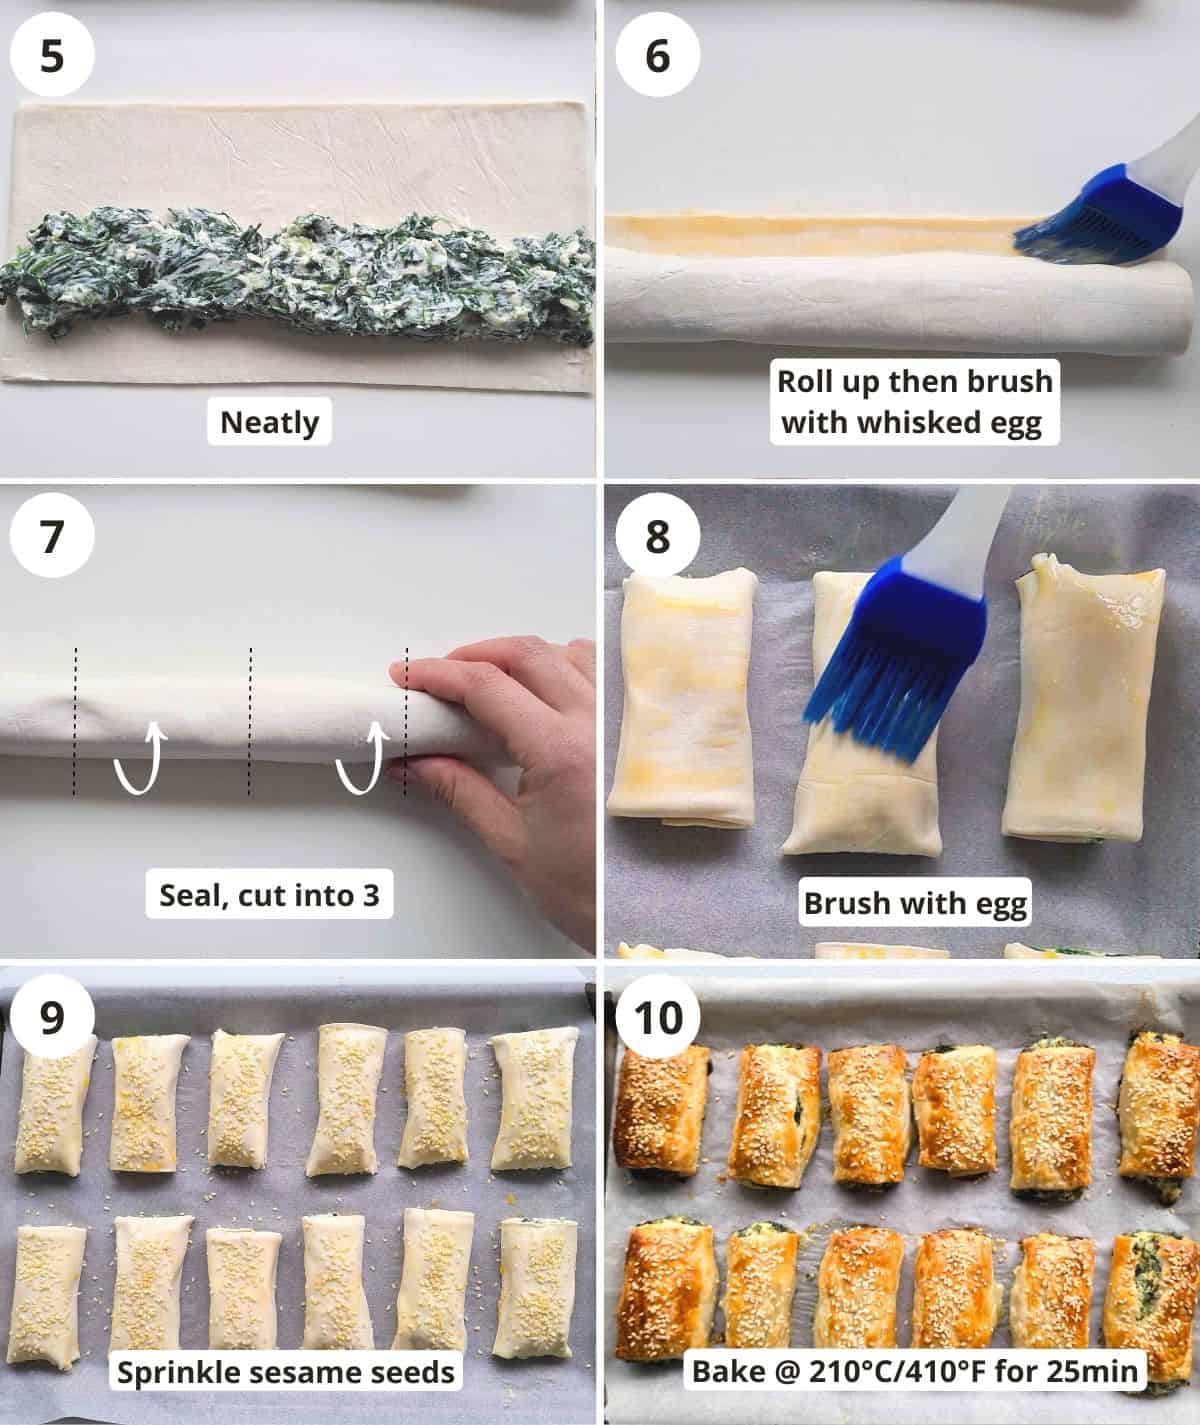 6 step collage showing how to roll the puff pastry rolls